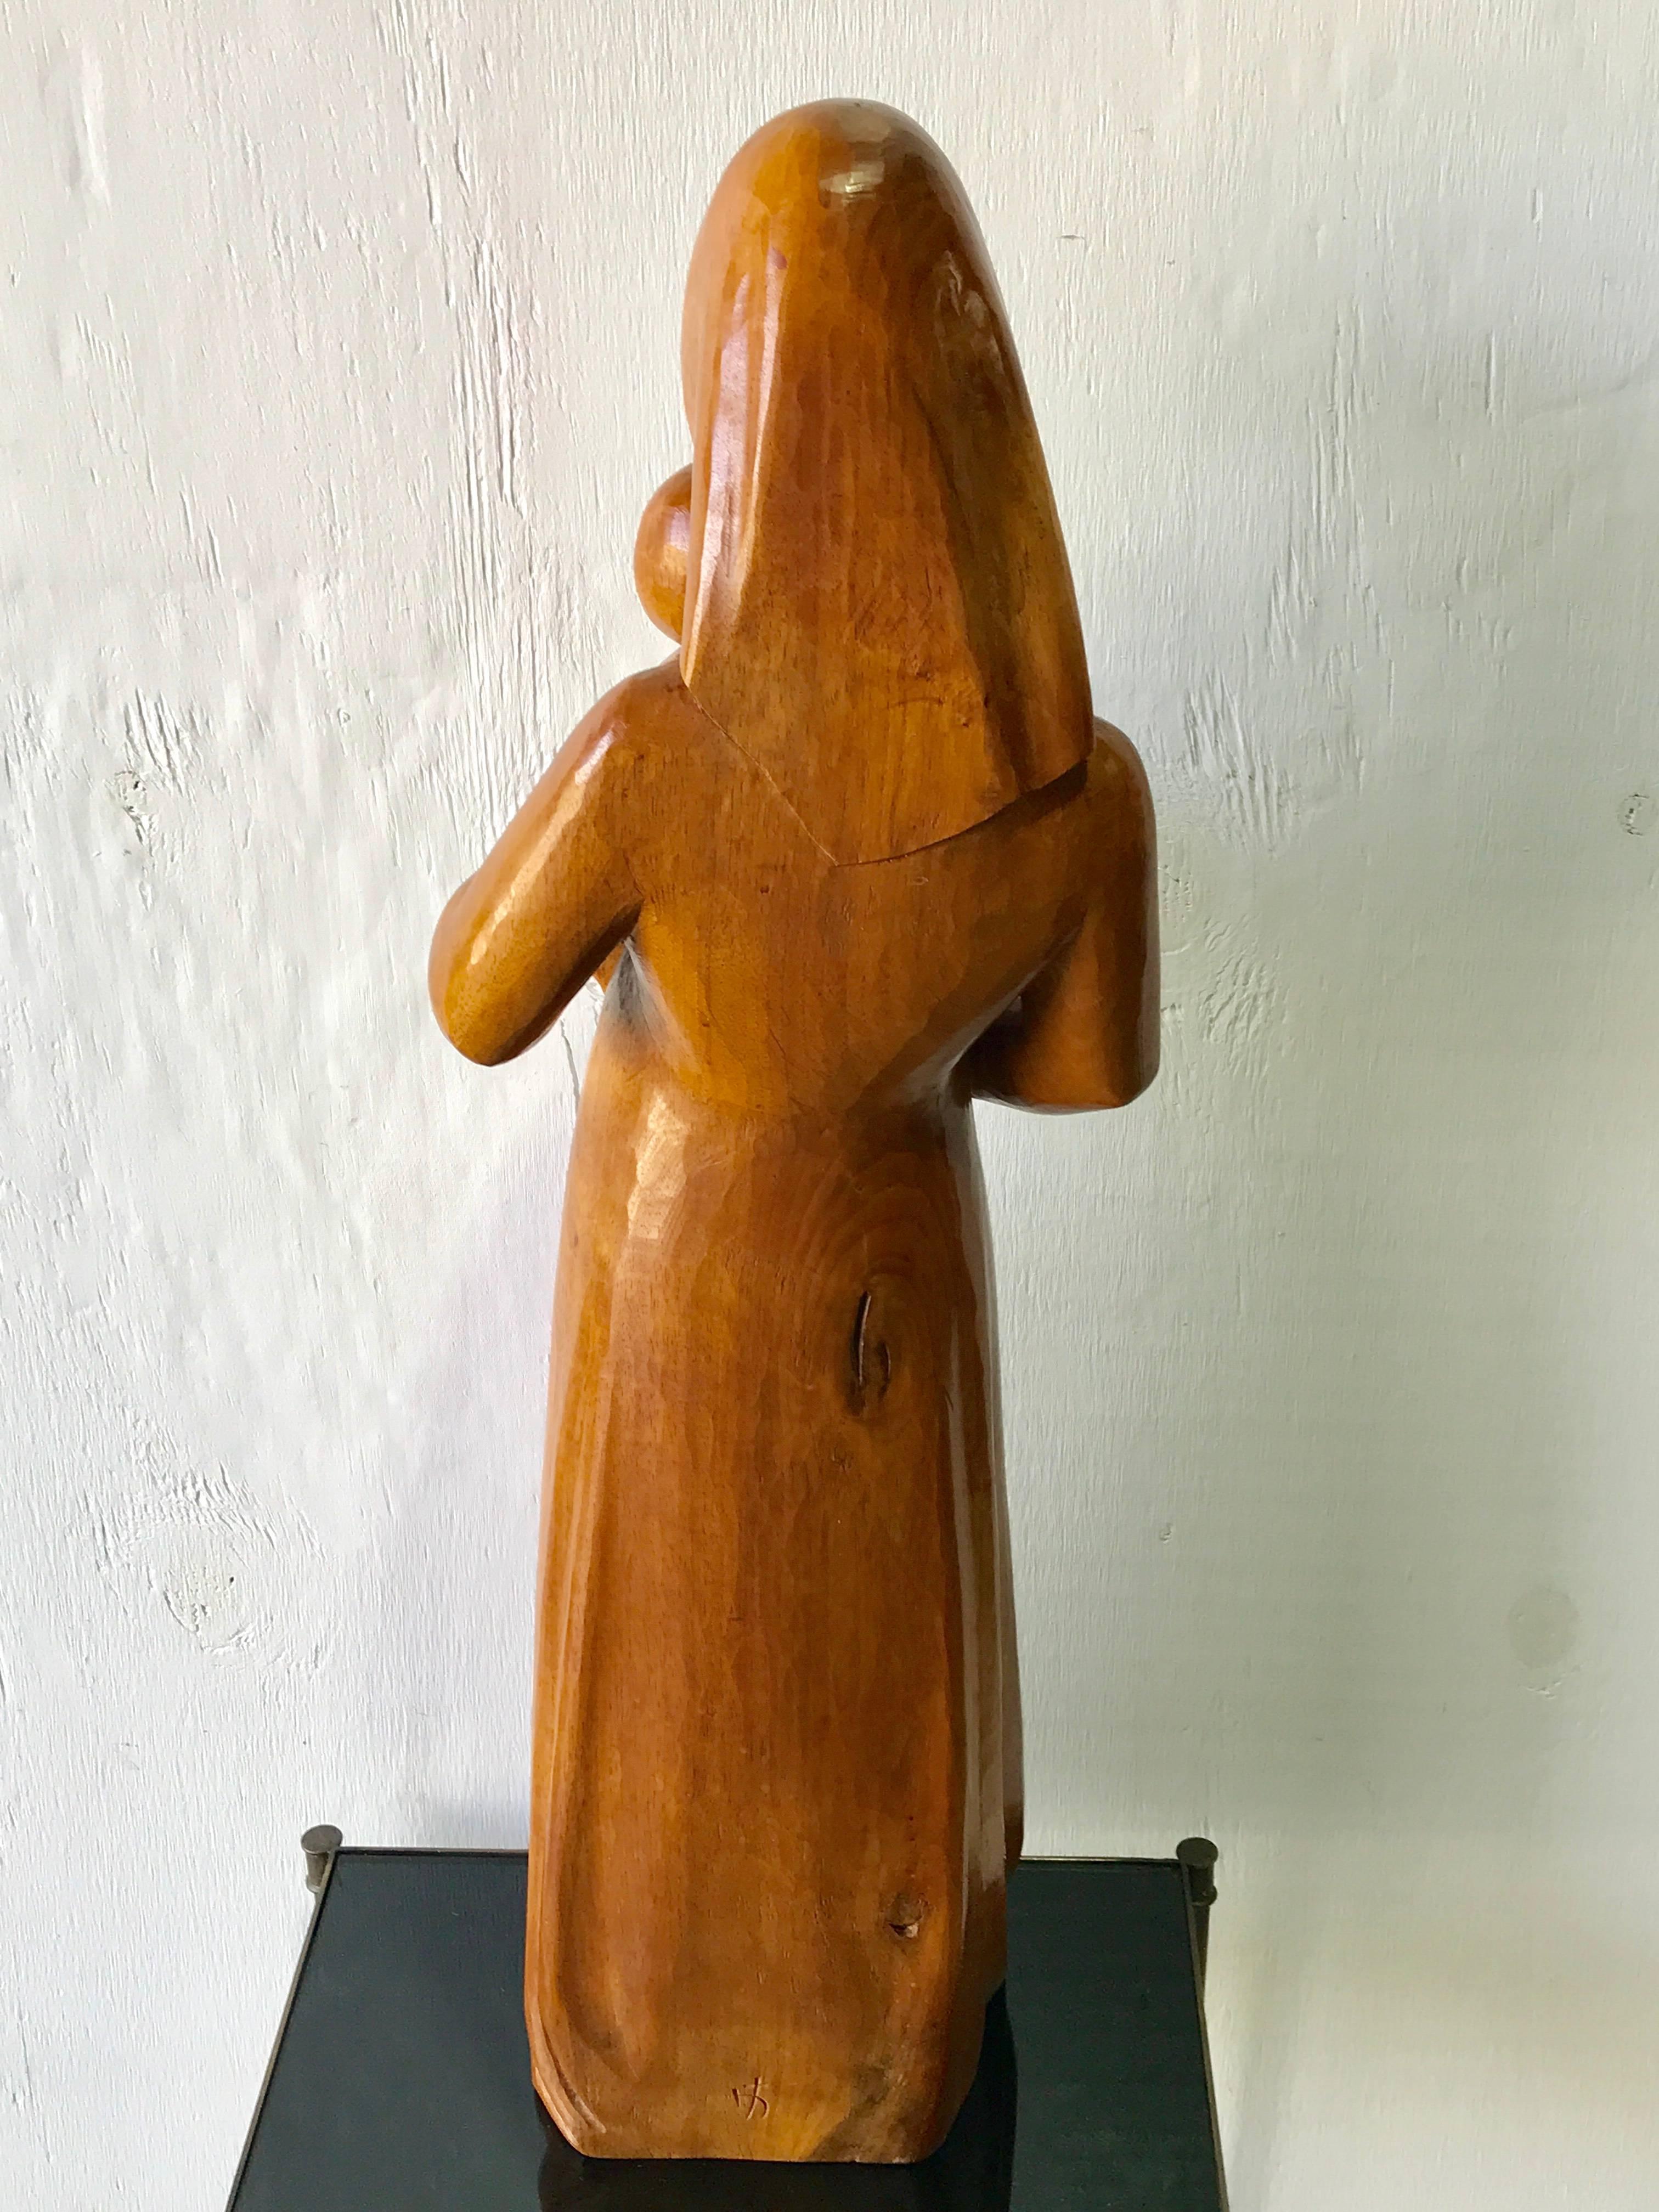 Soviet Midcentury Elm Wood Carving of Madonna and Child 1